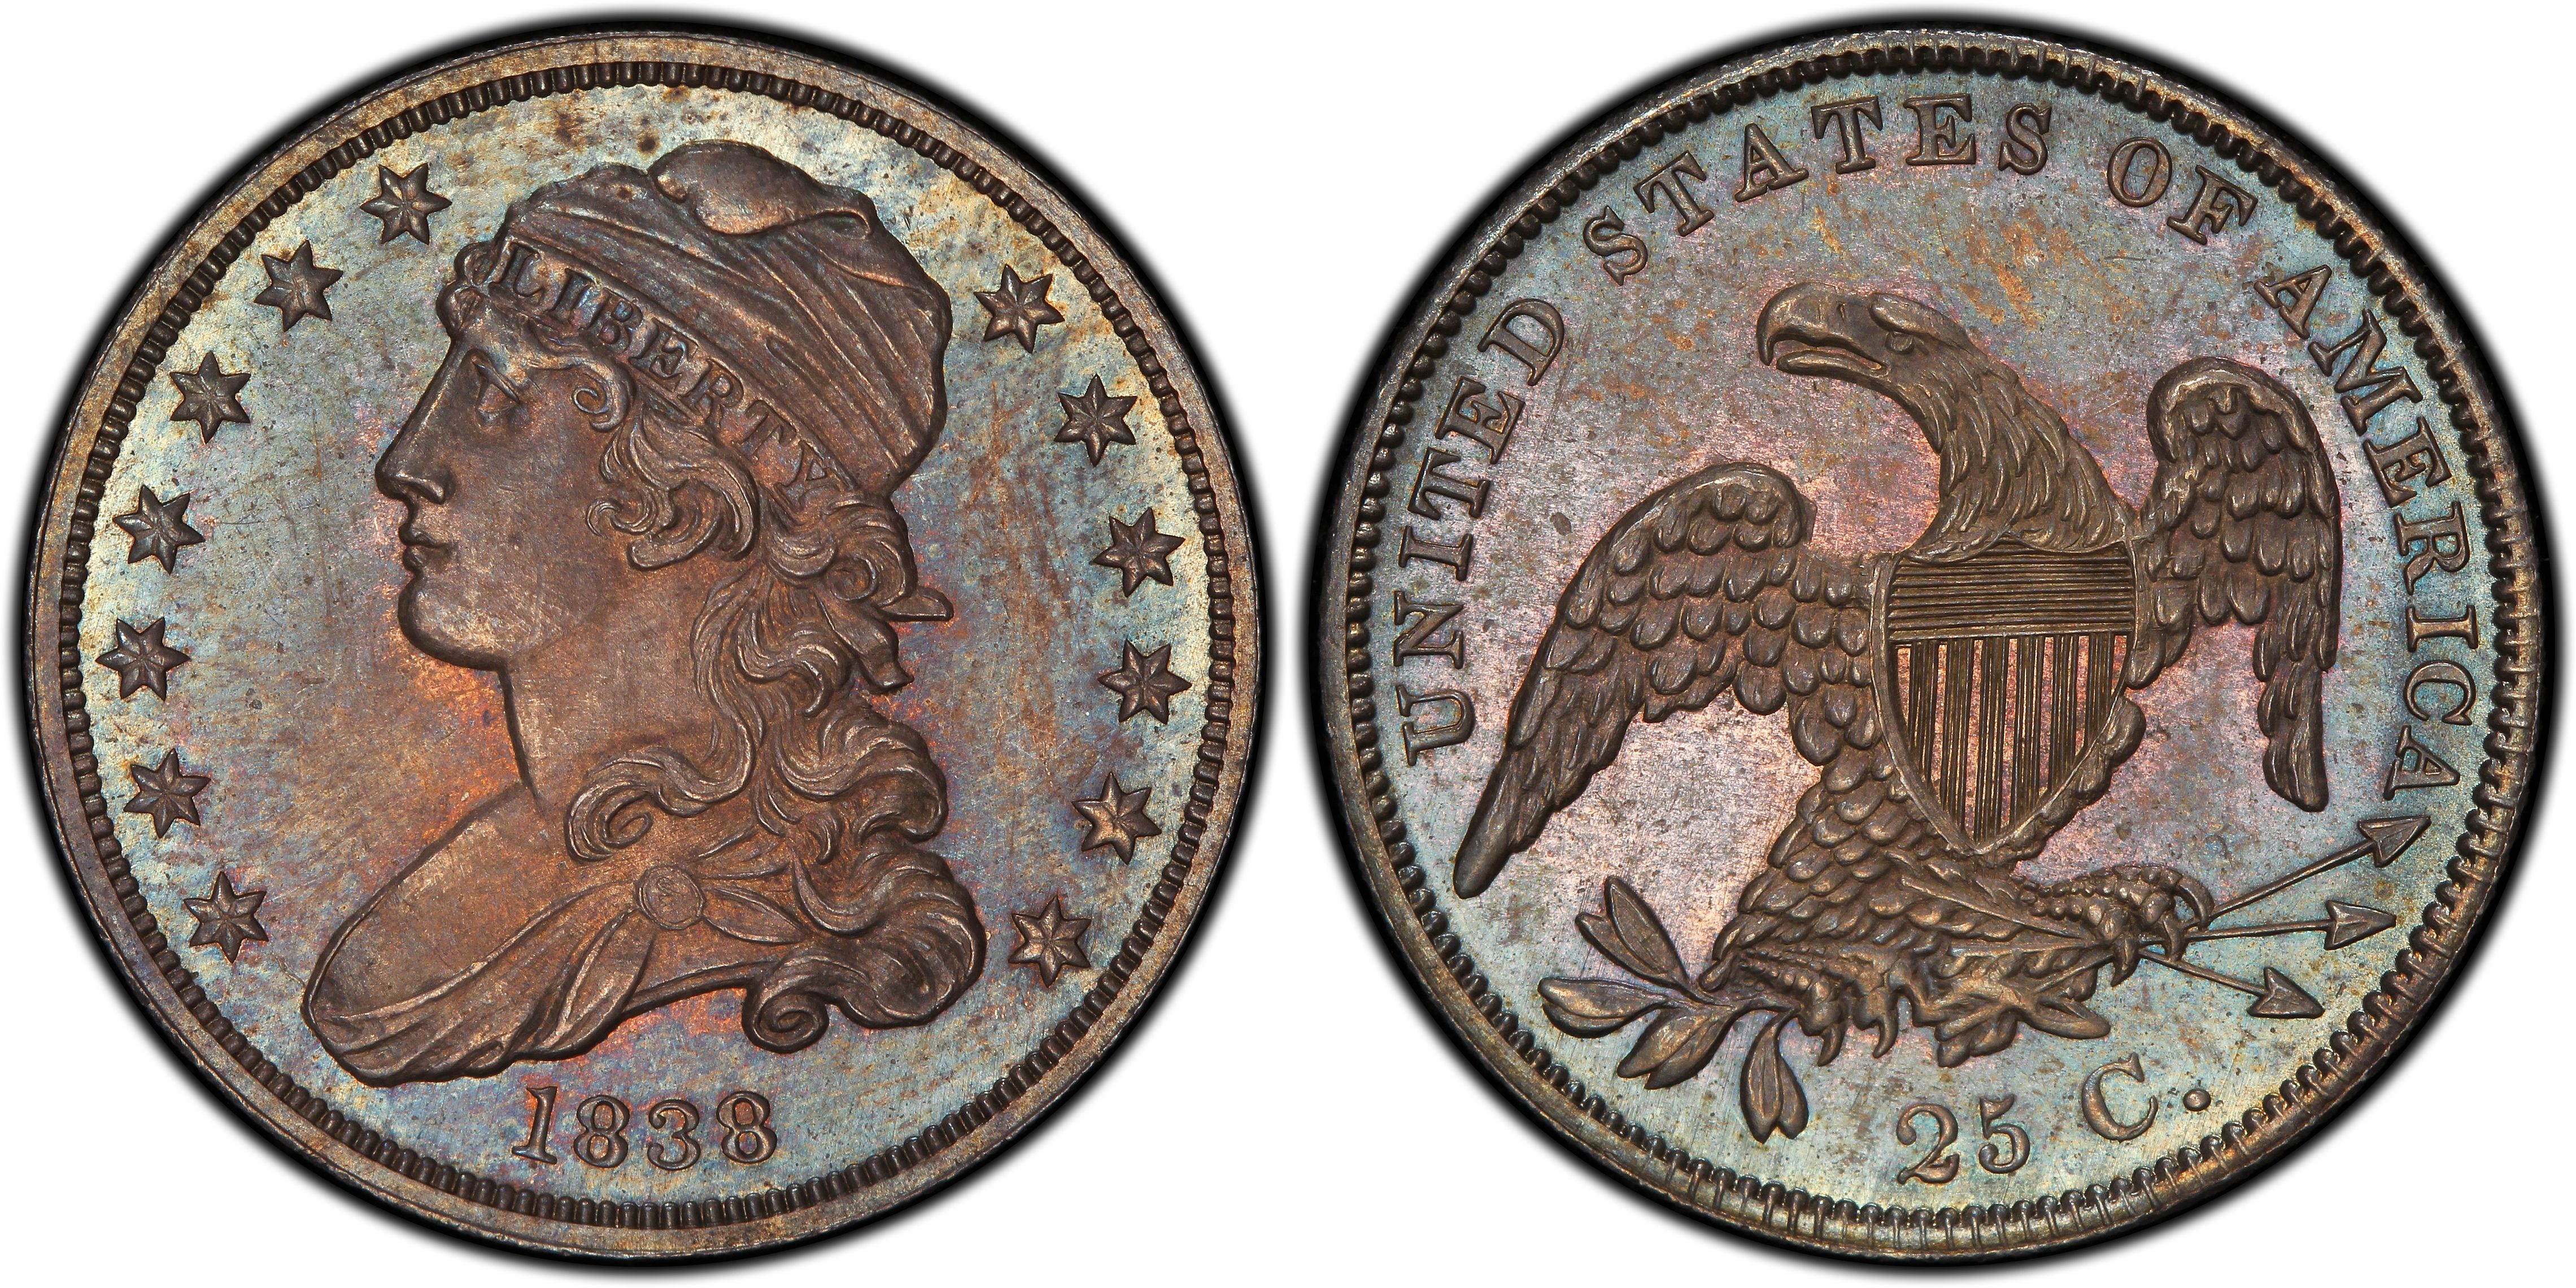 1838 25C Capped Bust (Proof) Capped Bust Quarter - PCGS CoinFacts